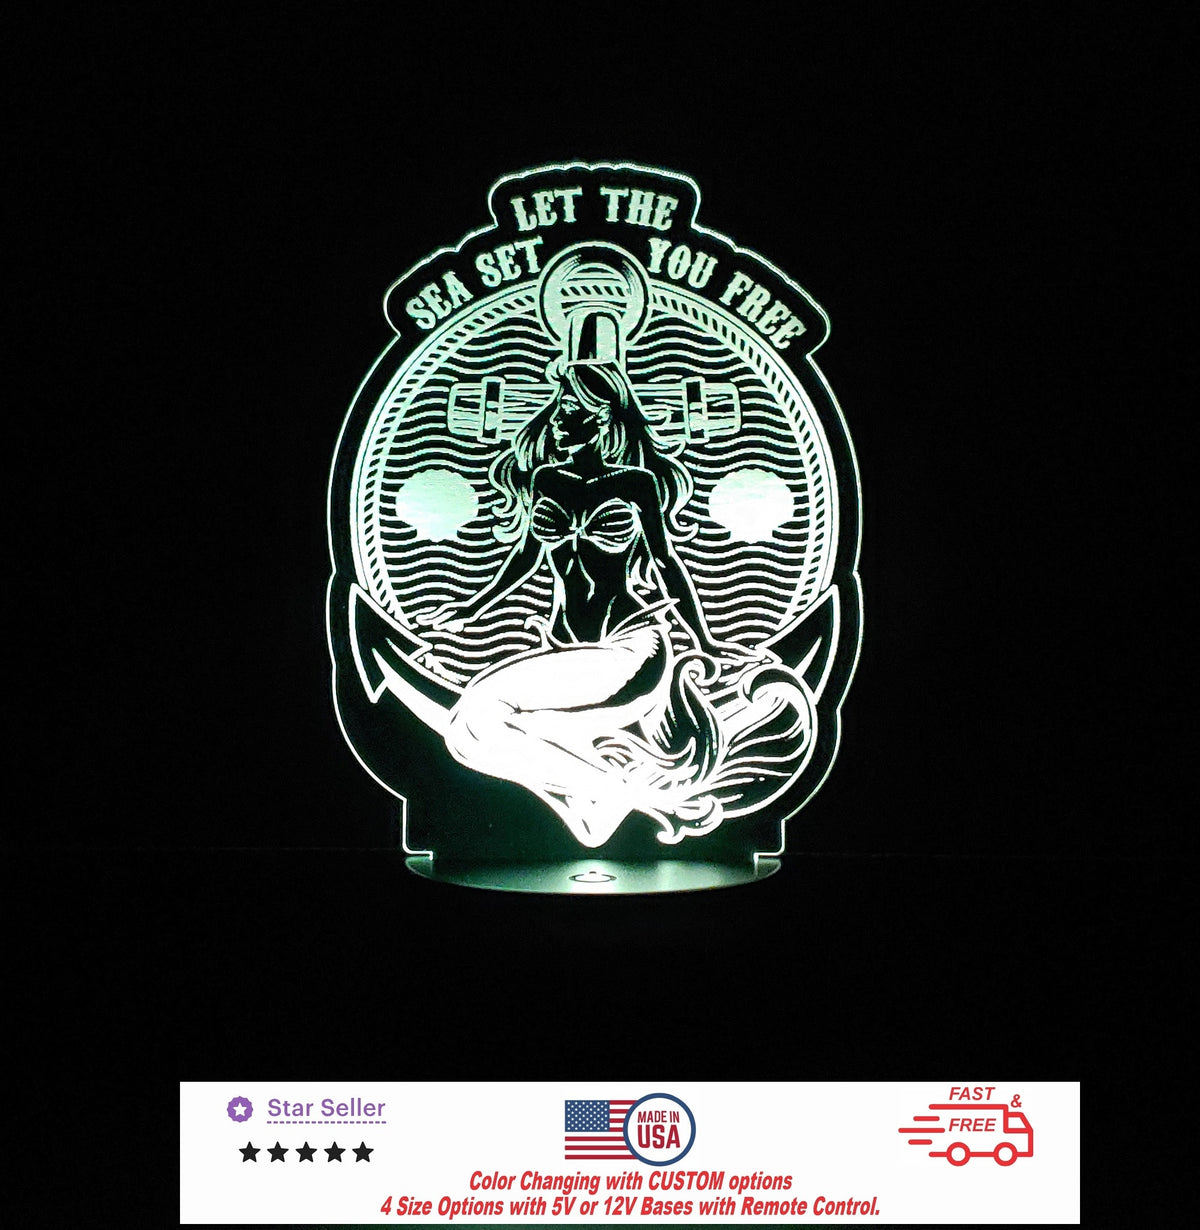 Let the Sea Sign LED Light Personalized Led Night Light, Custom Neon sign, Led Night Light Light Sign 4 Sizes Free Shipping Made in USA